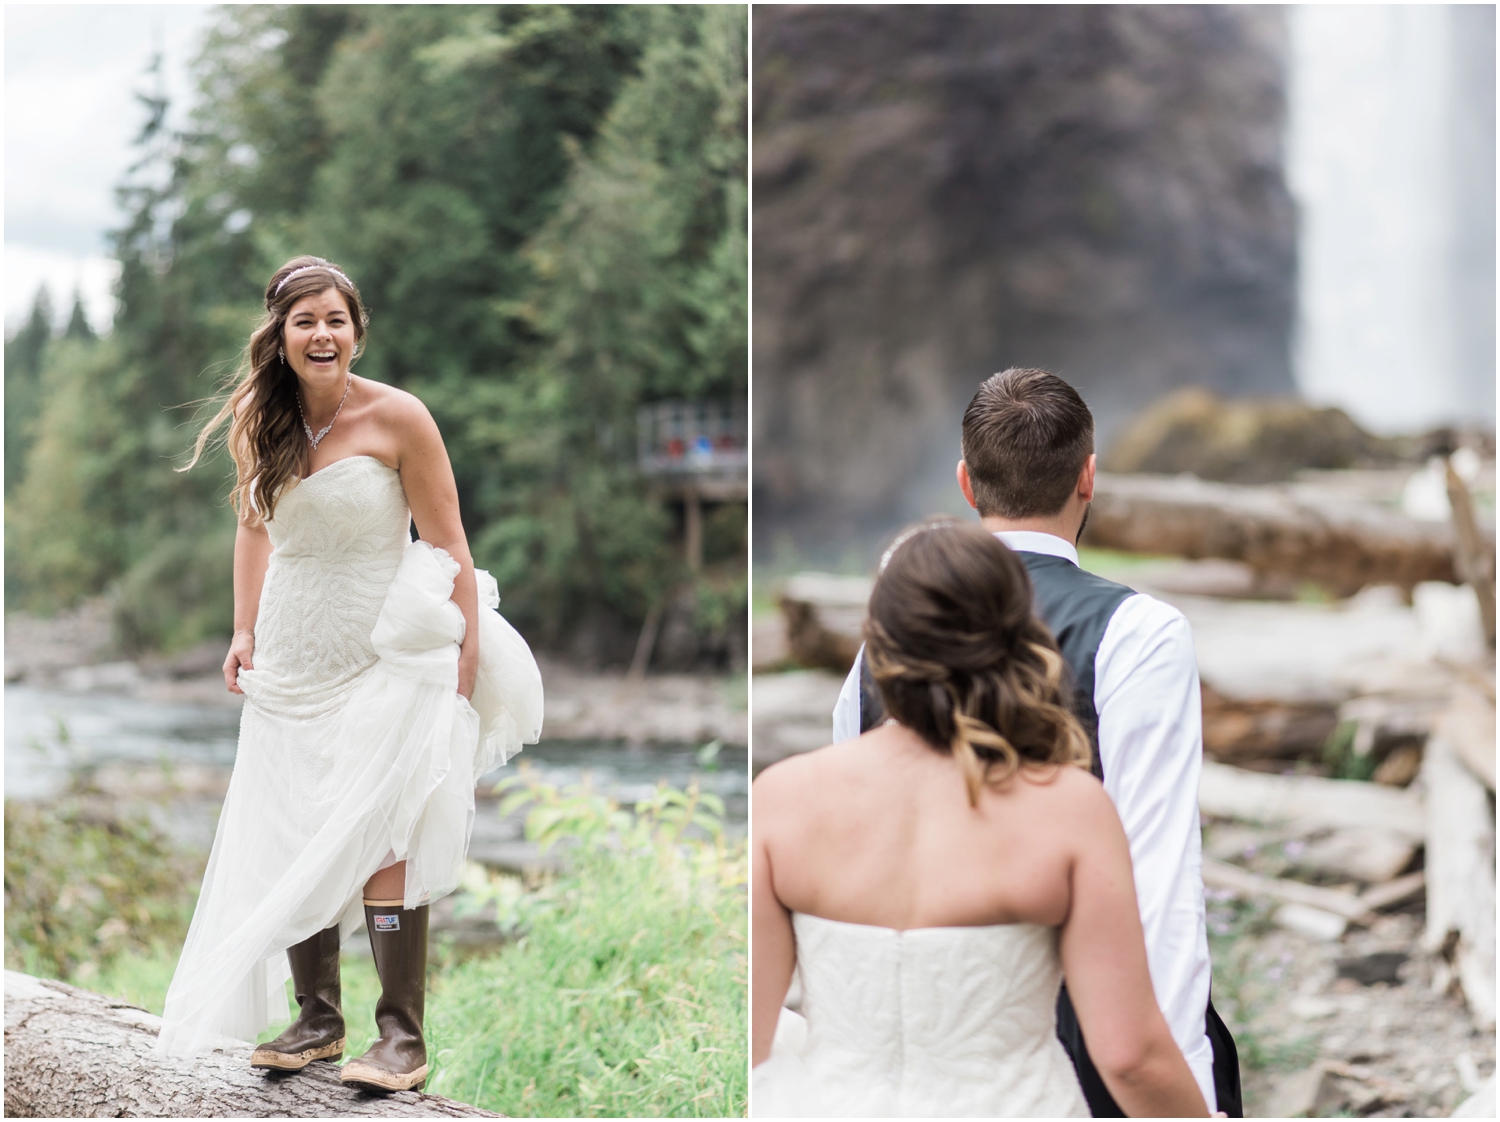 Kristy and marks salish lodge wedding at snoqualmie falls 